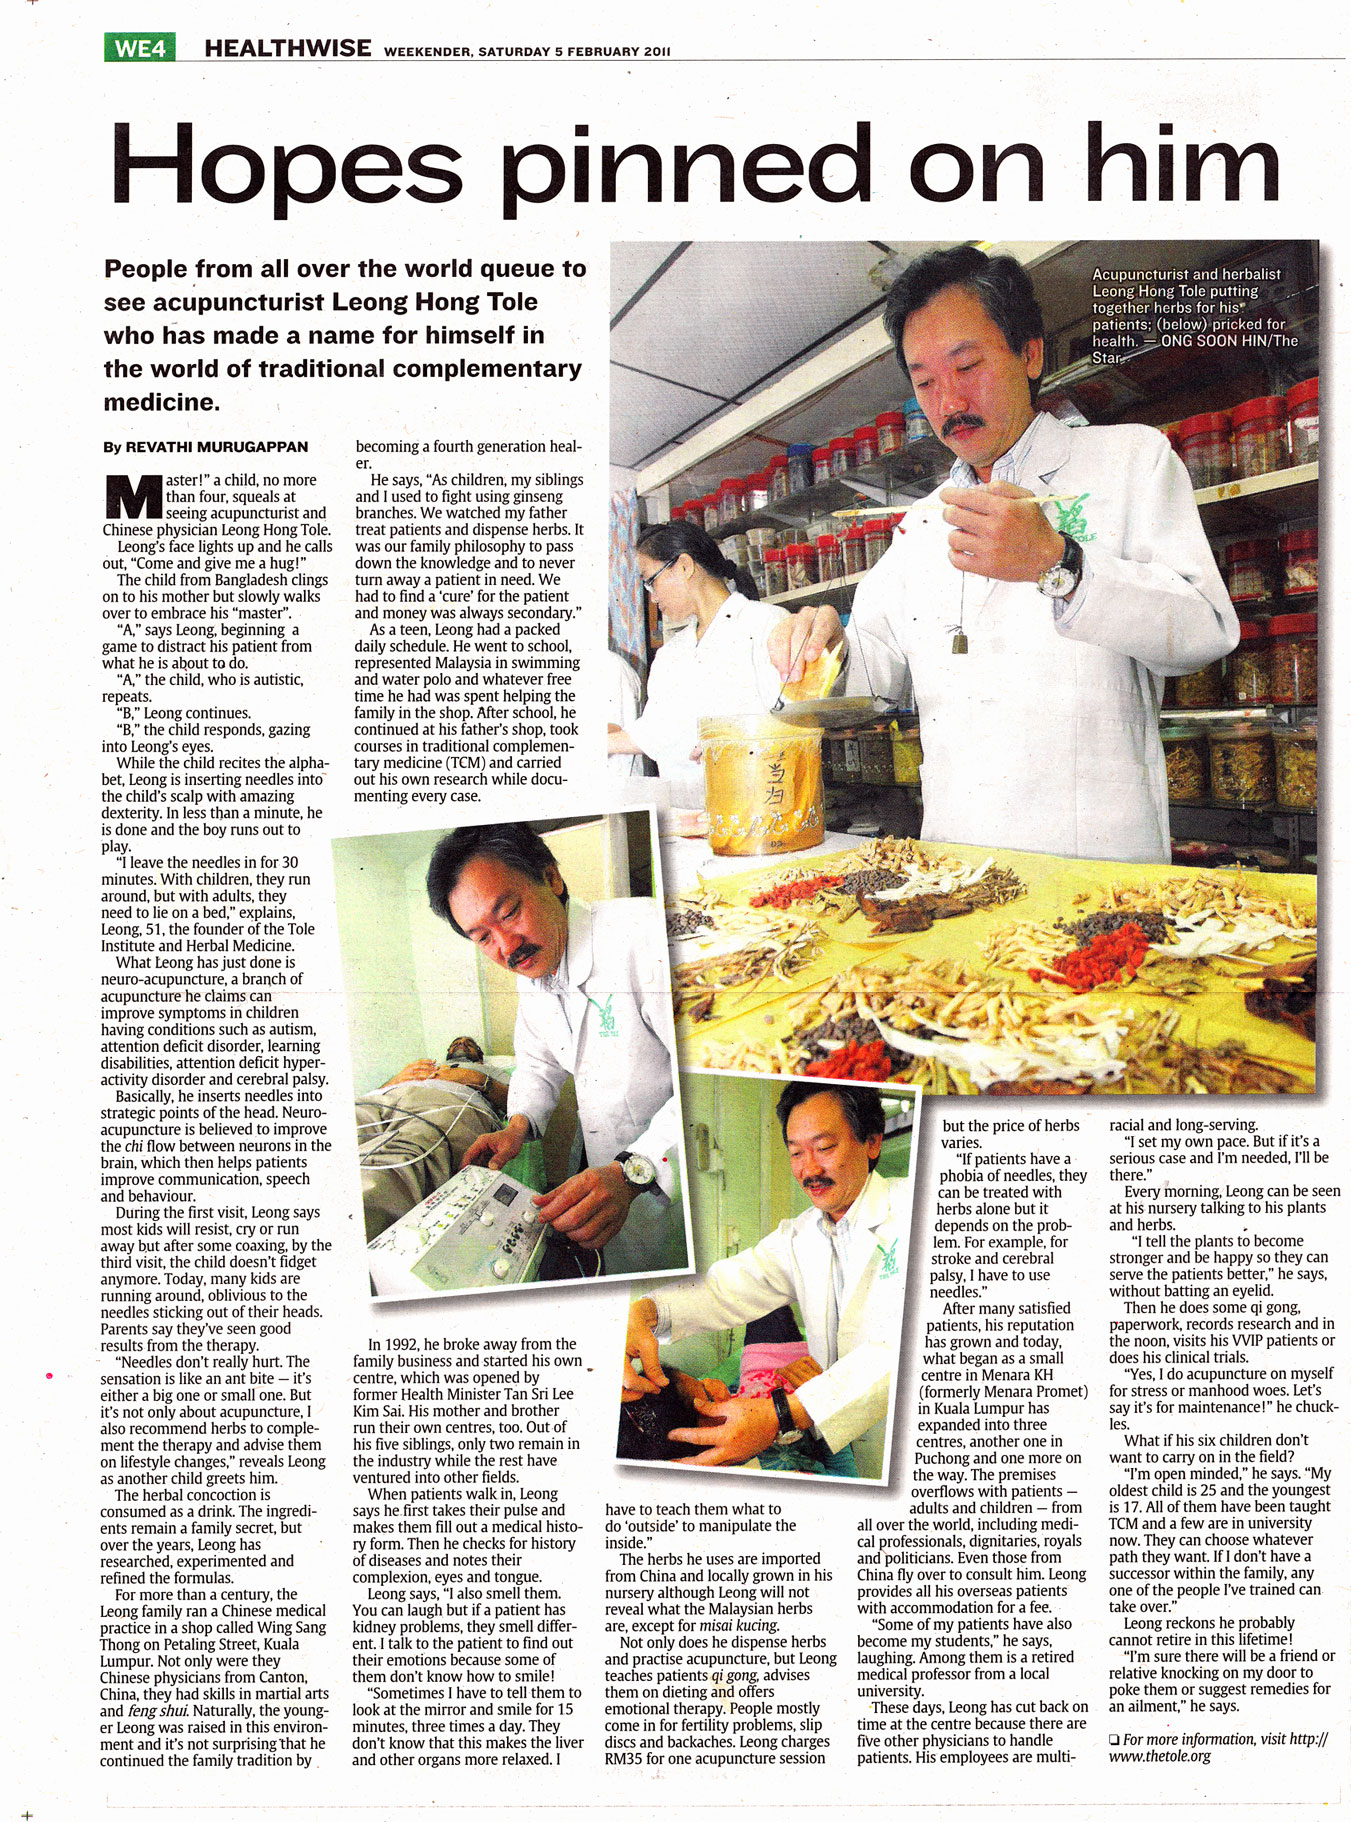 The Star Newspaper report on Our Master's  Acupuncture Treatment and Herbal Medical Treatment